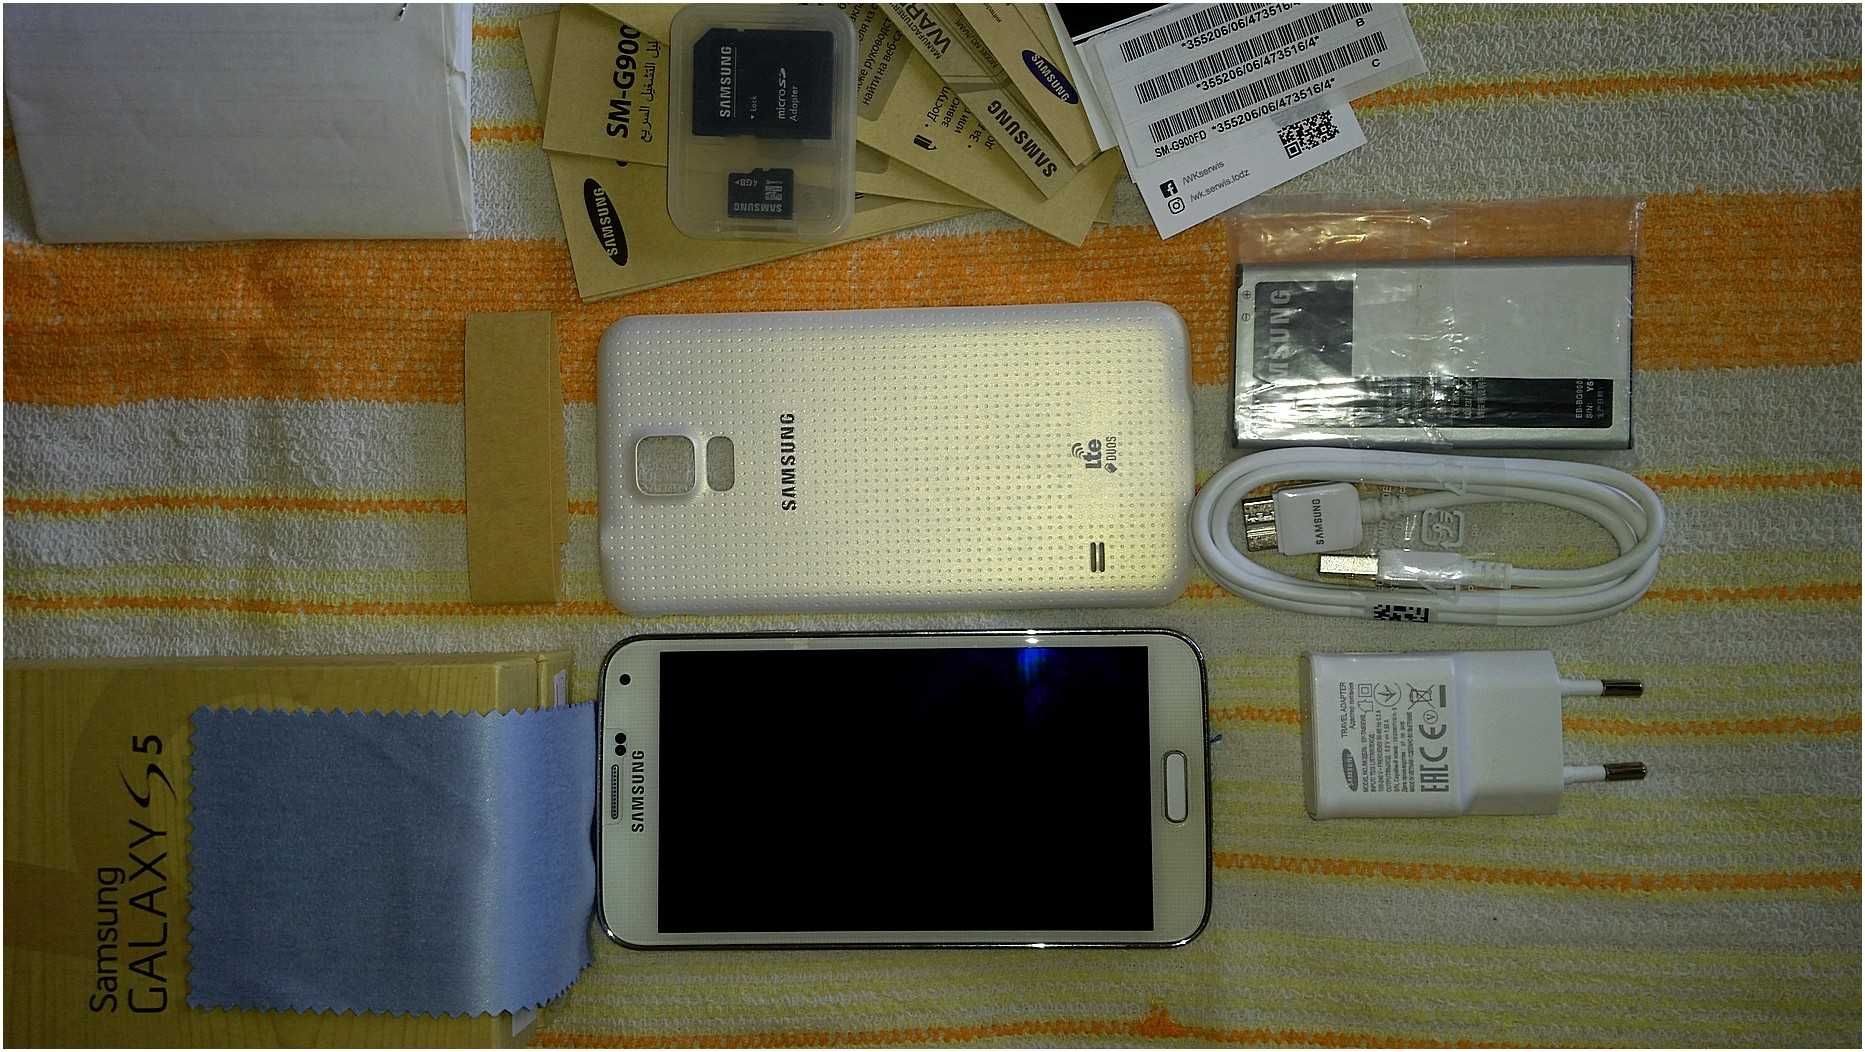 | Samsung Galaxy S5 Duos Dual | 4G LTE | SM-G900FD | Shimmery White  |